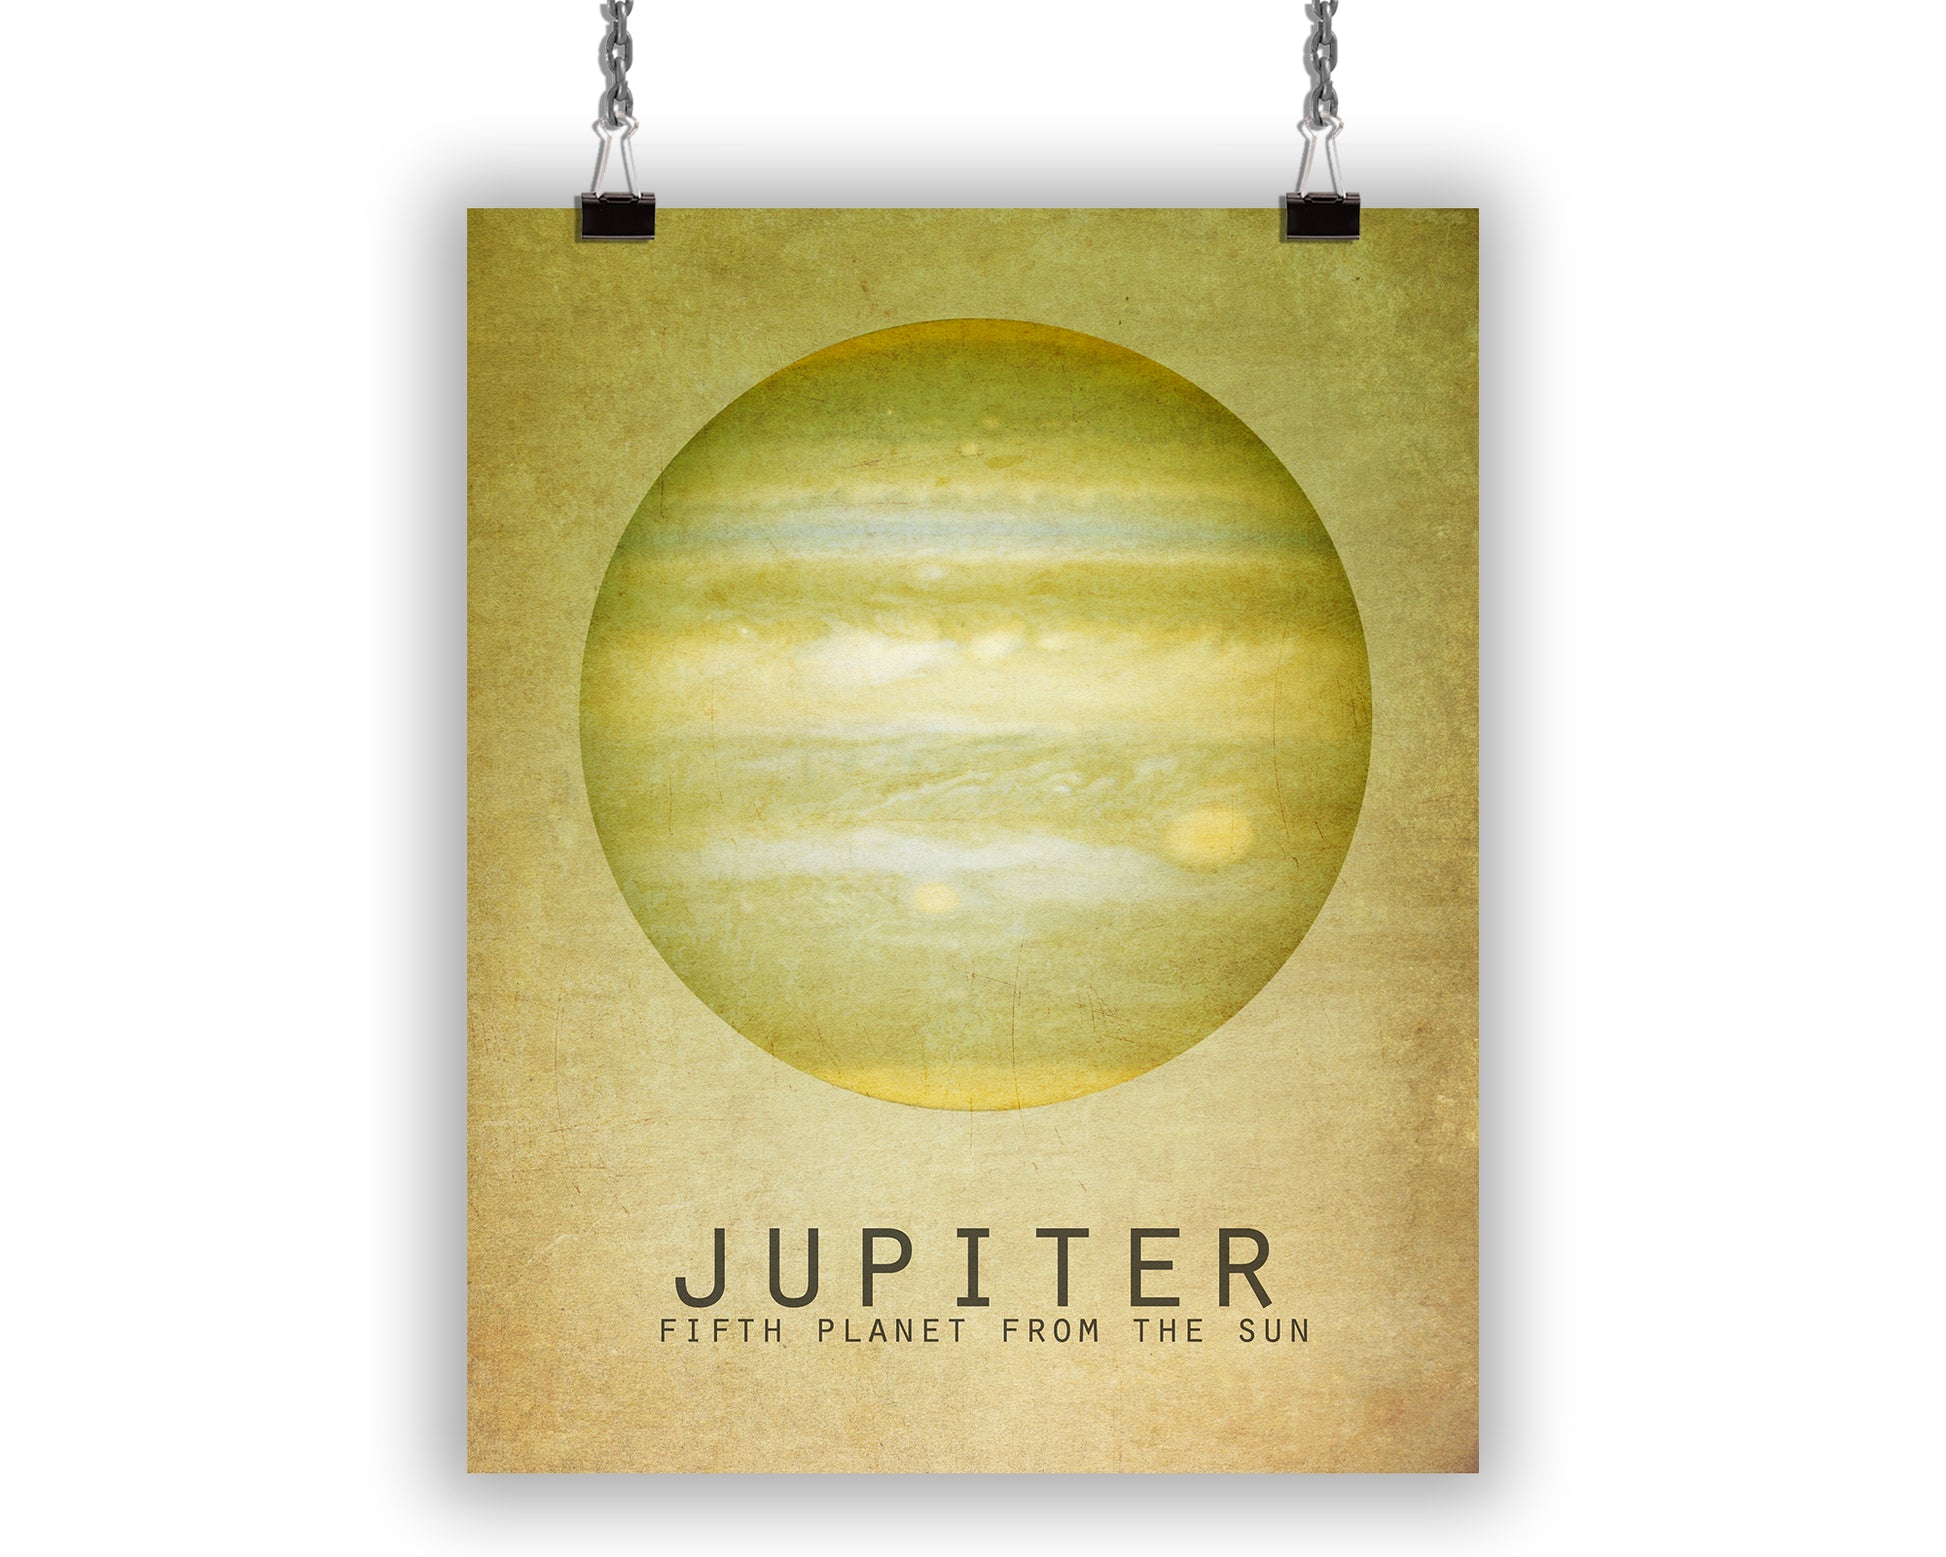 Art Print with a green minimalist image of the planet Jupiter